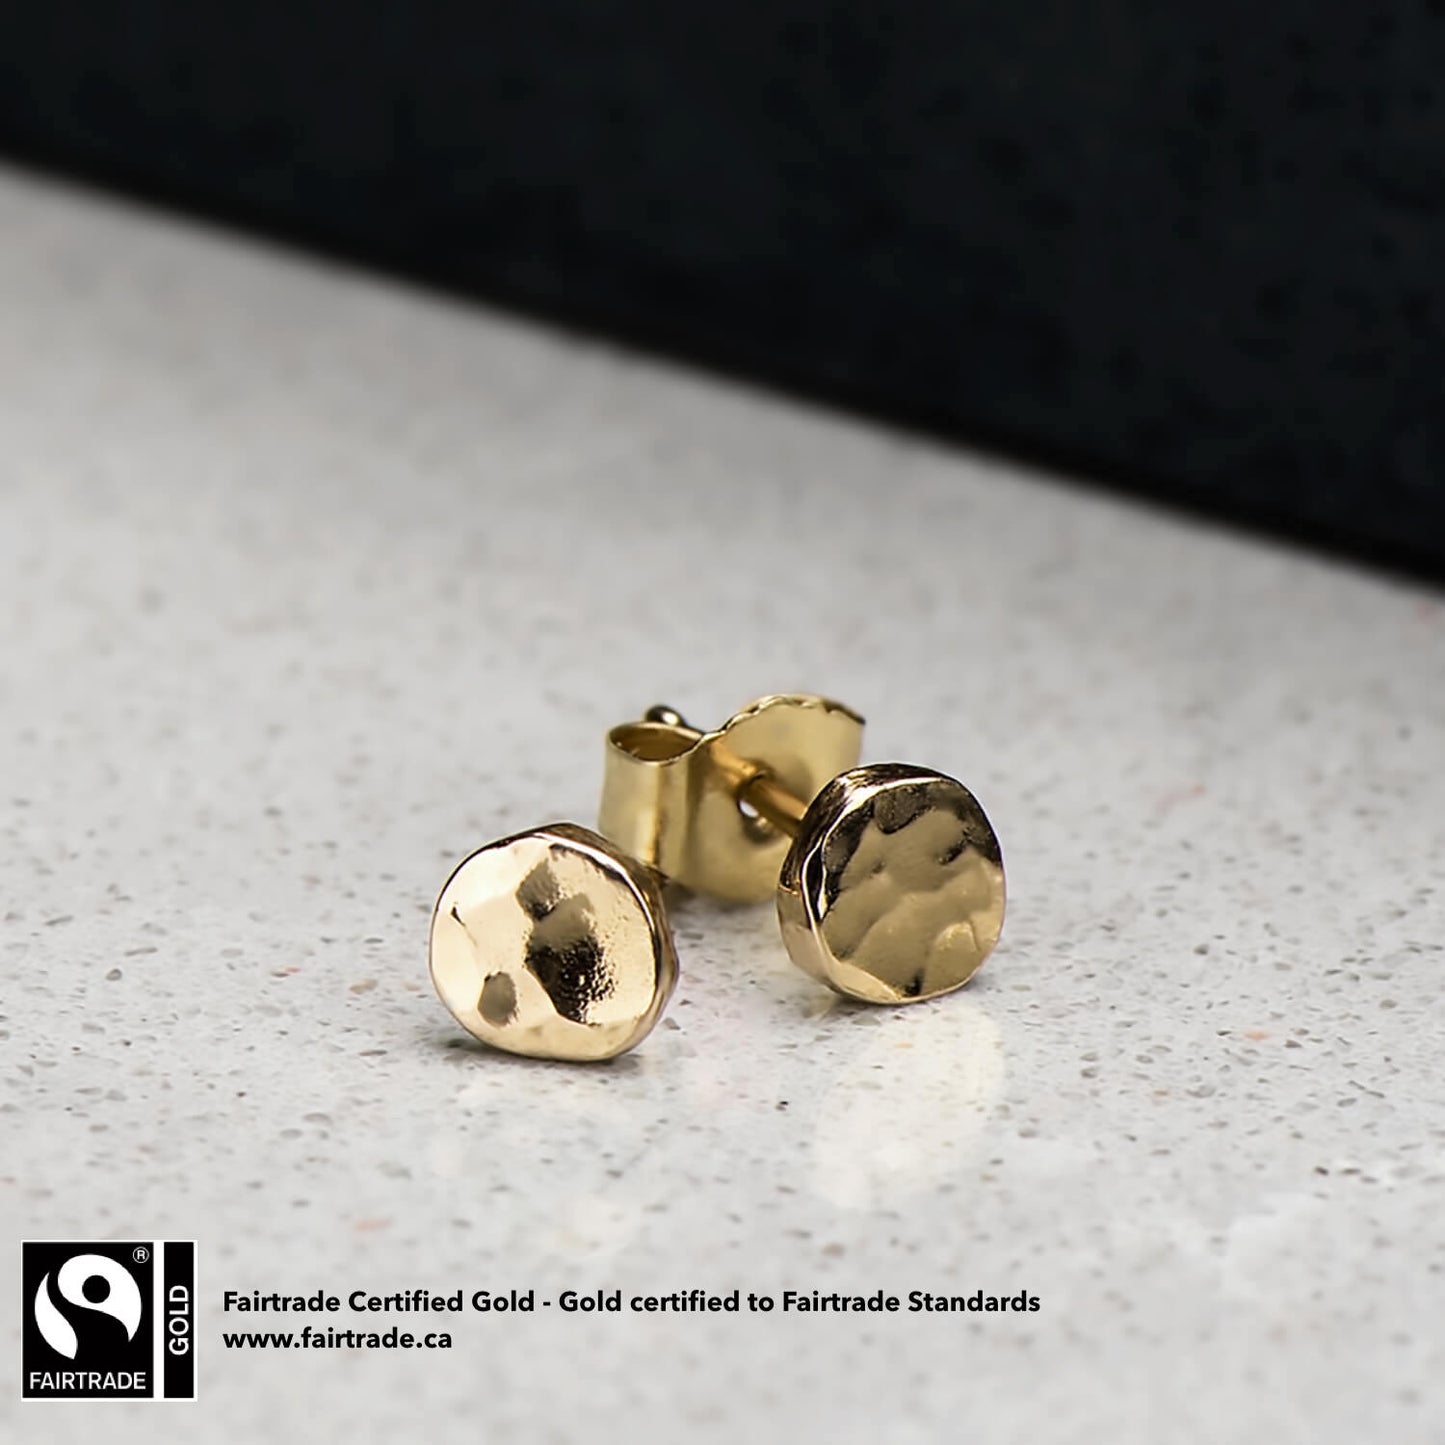 Hammer Finished Studs in Fairtrade Certified Gold